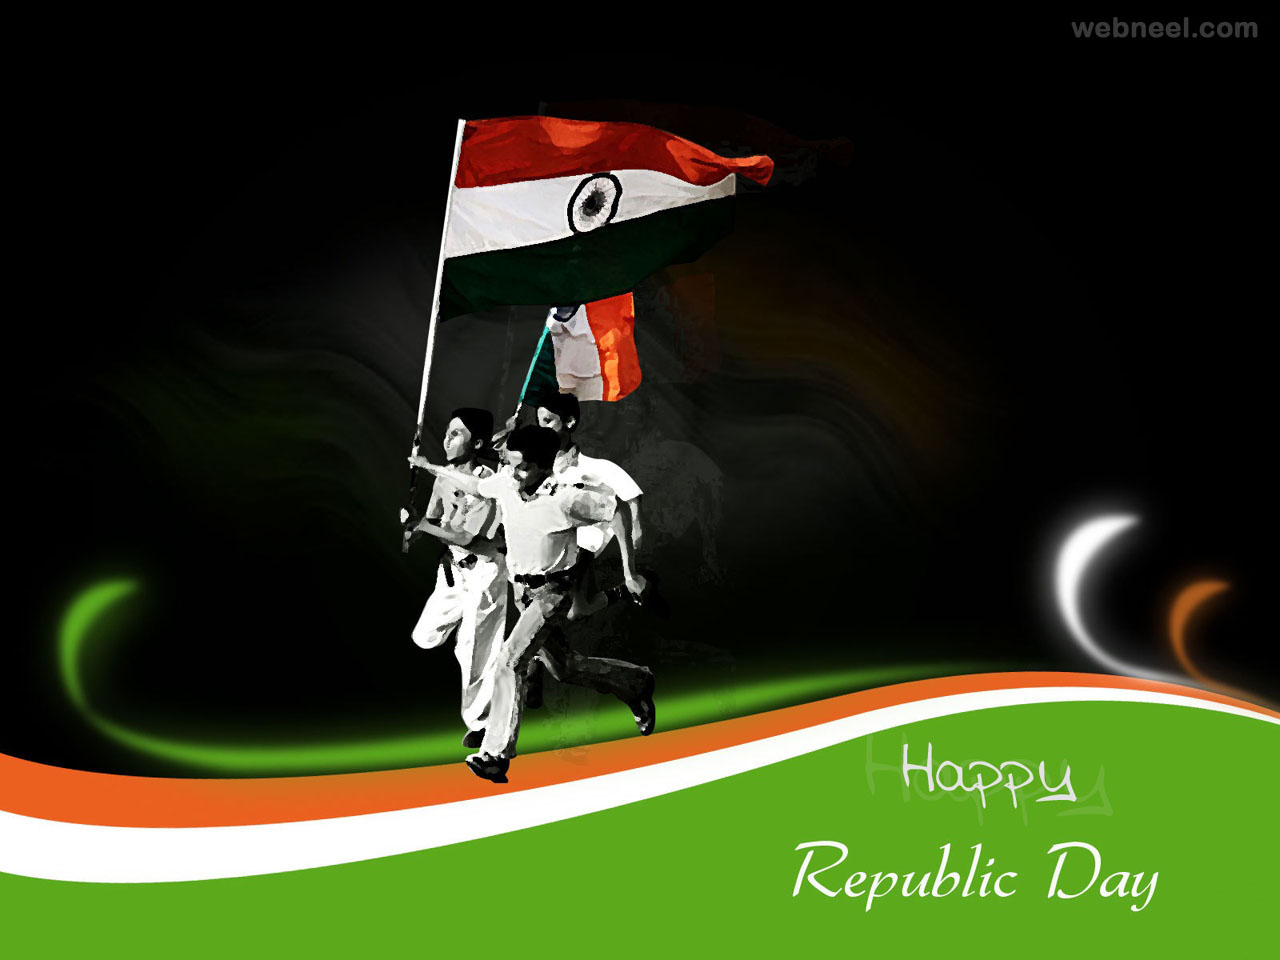 republic day wallpaper hd,green,games,font,competition event,graphic design